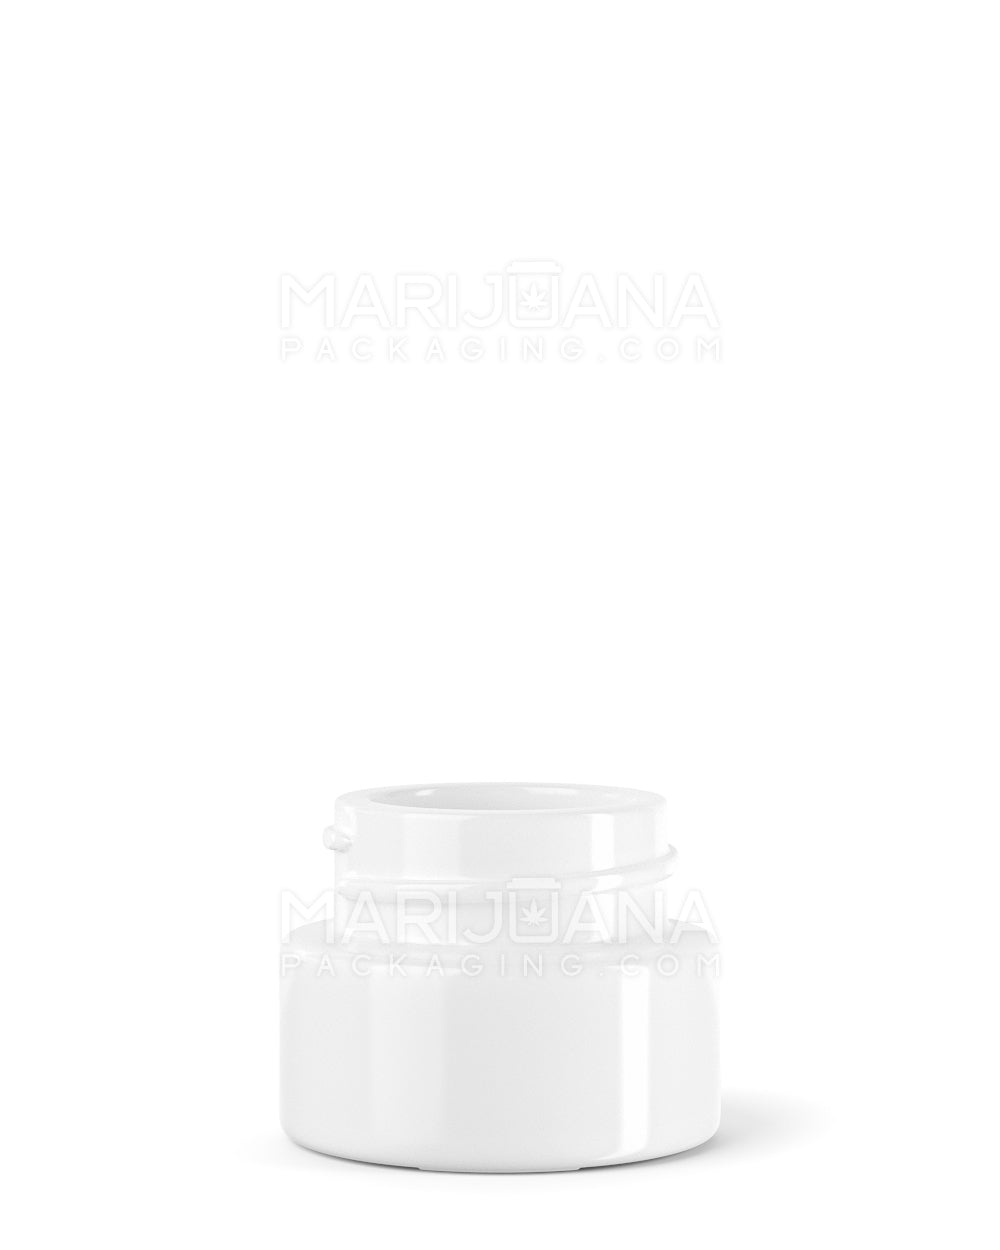 Glossy White Glass Concentrate Containers | 29mm - 5mL - 504 Count - 1